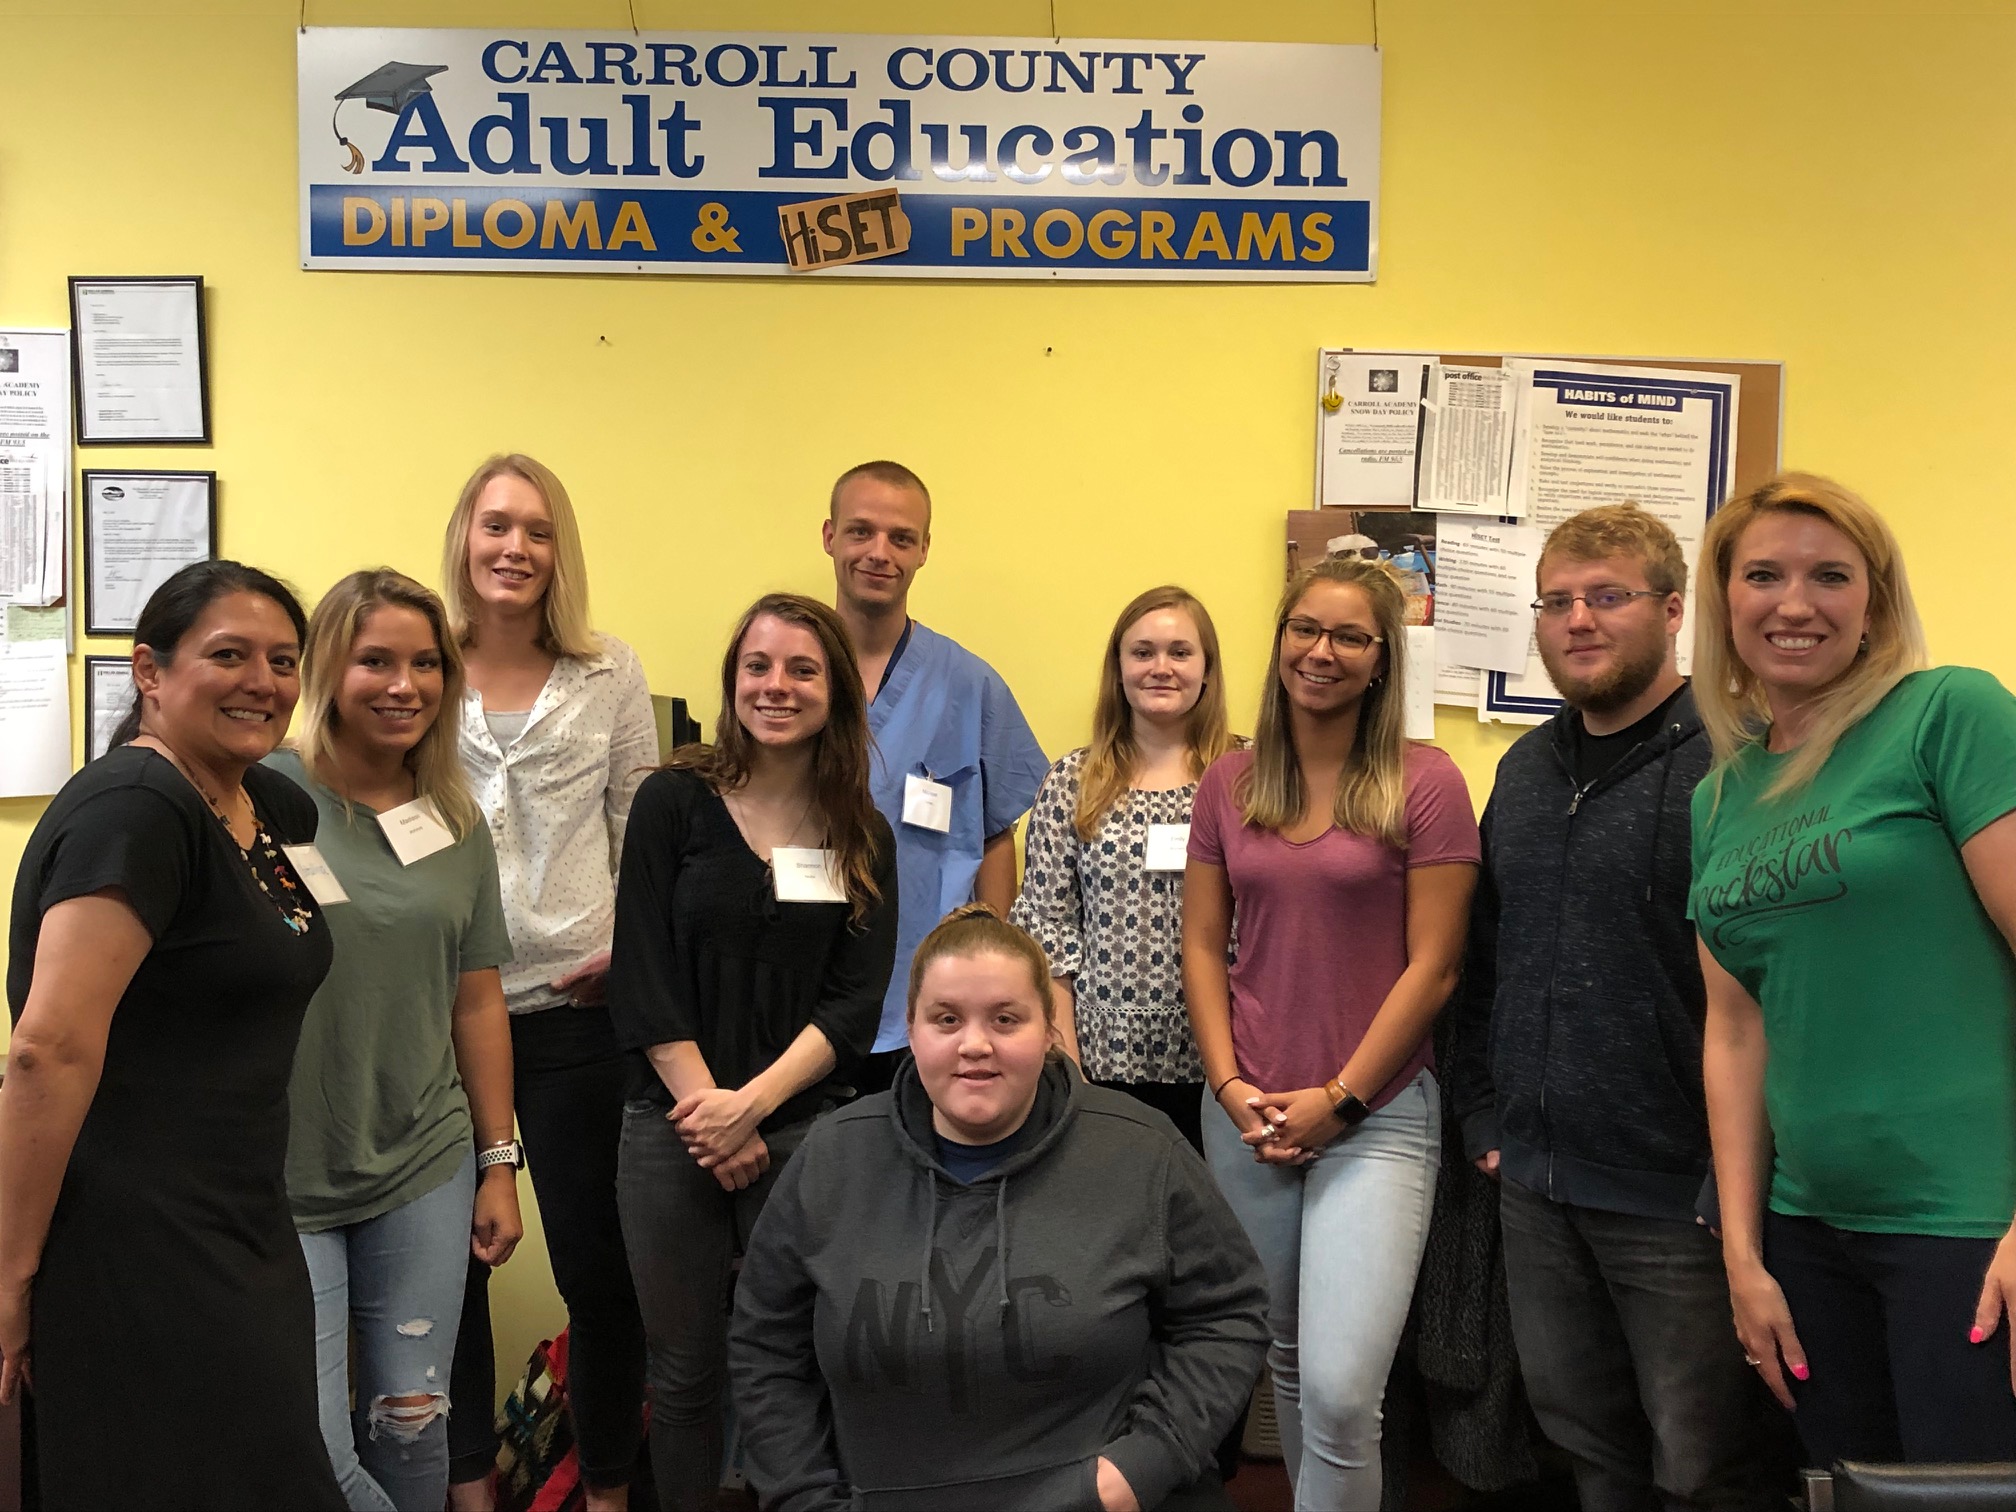 Young Adults Raising Awareness in Carroll County